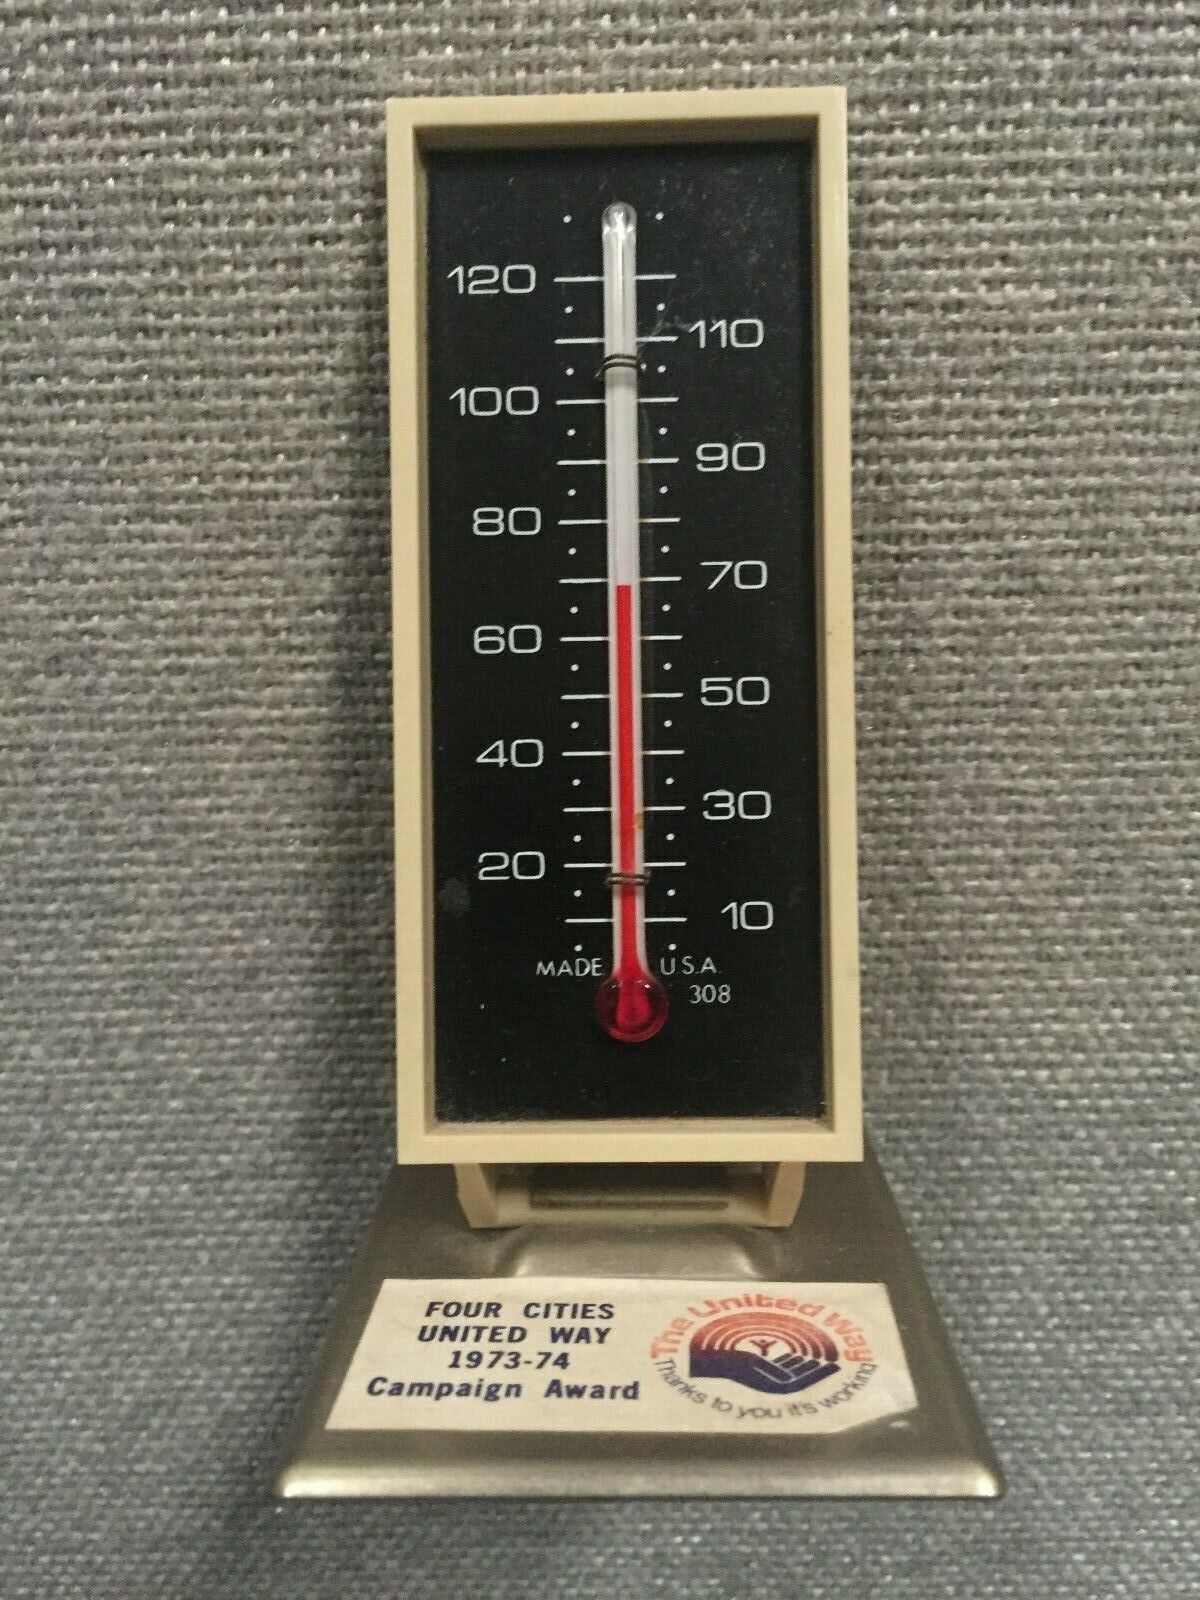 Vintage 1973-74 United Way Four Cities Campaign Award Thermometer